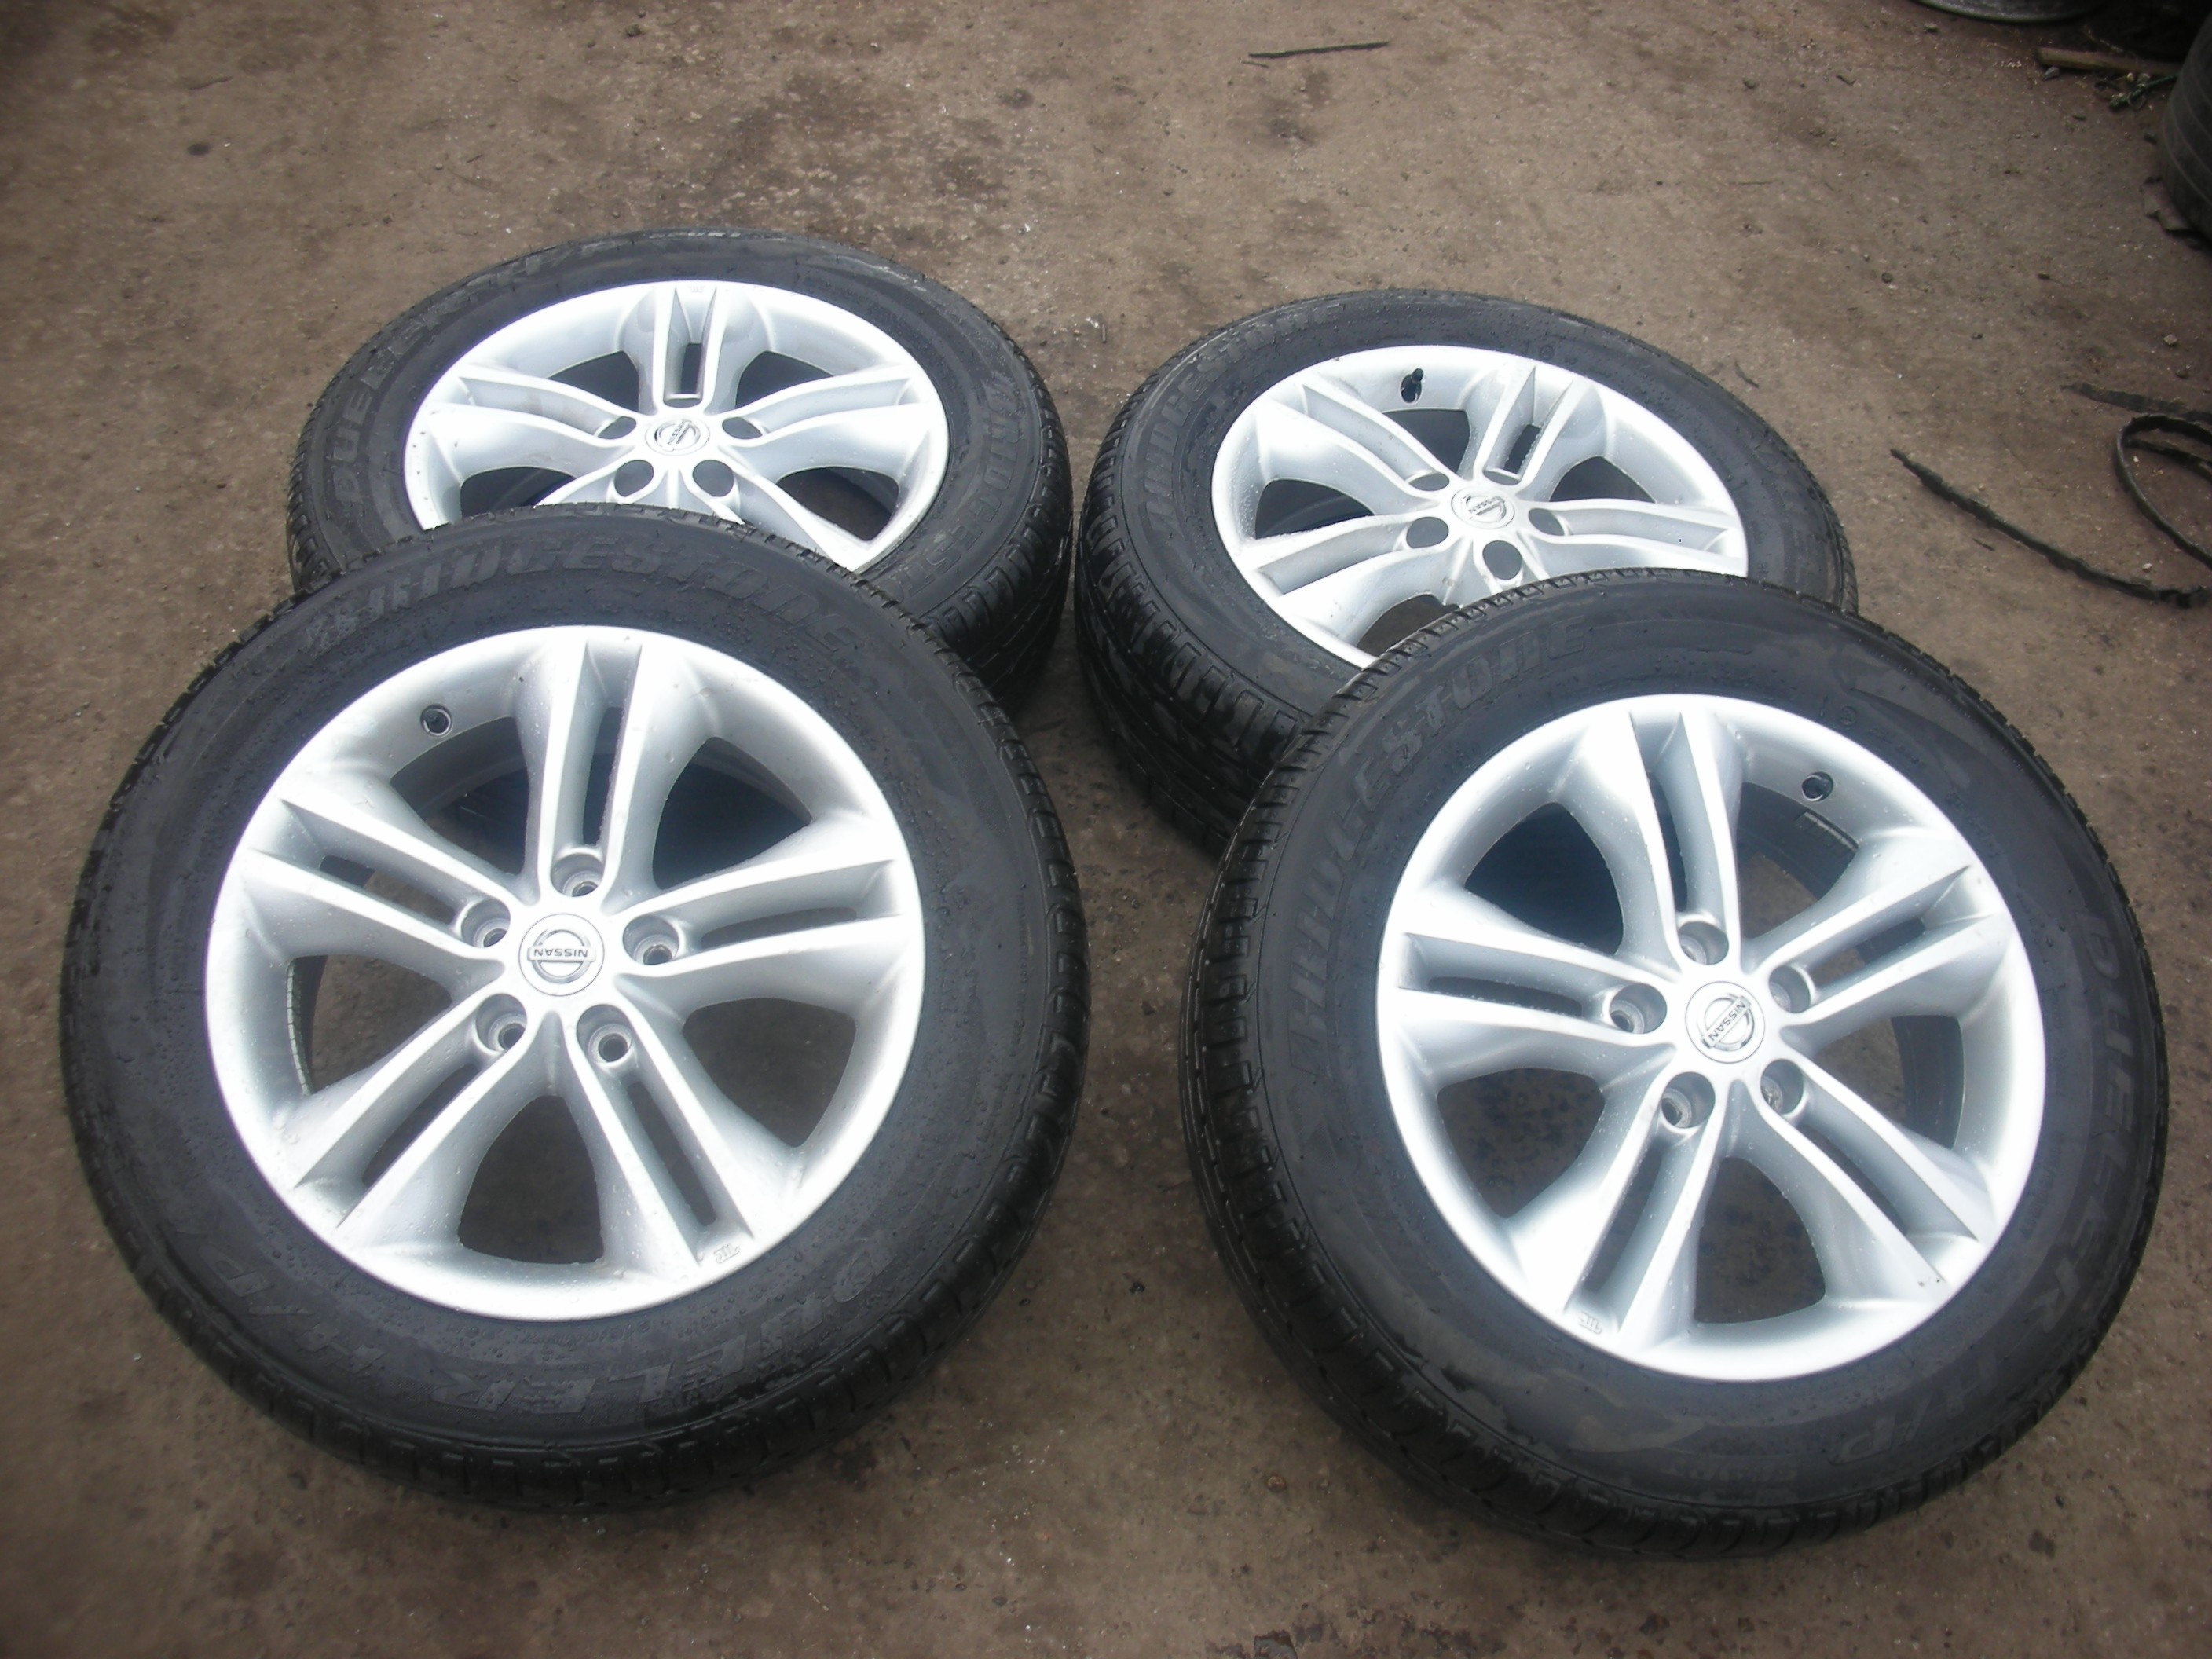 NISSAN QASHQAI 17" ALLOY WHEELS WITH TYRES 5 STUDS 2006-2012.